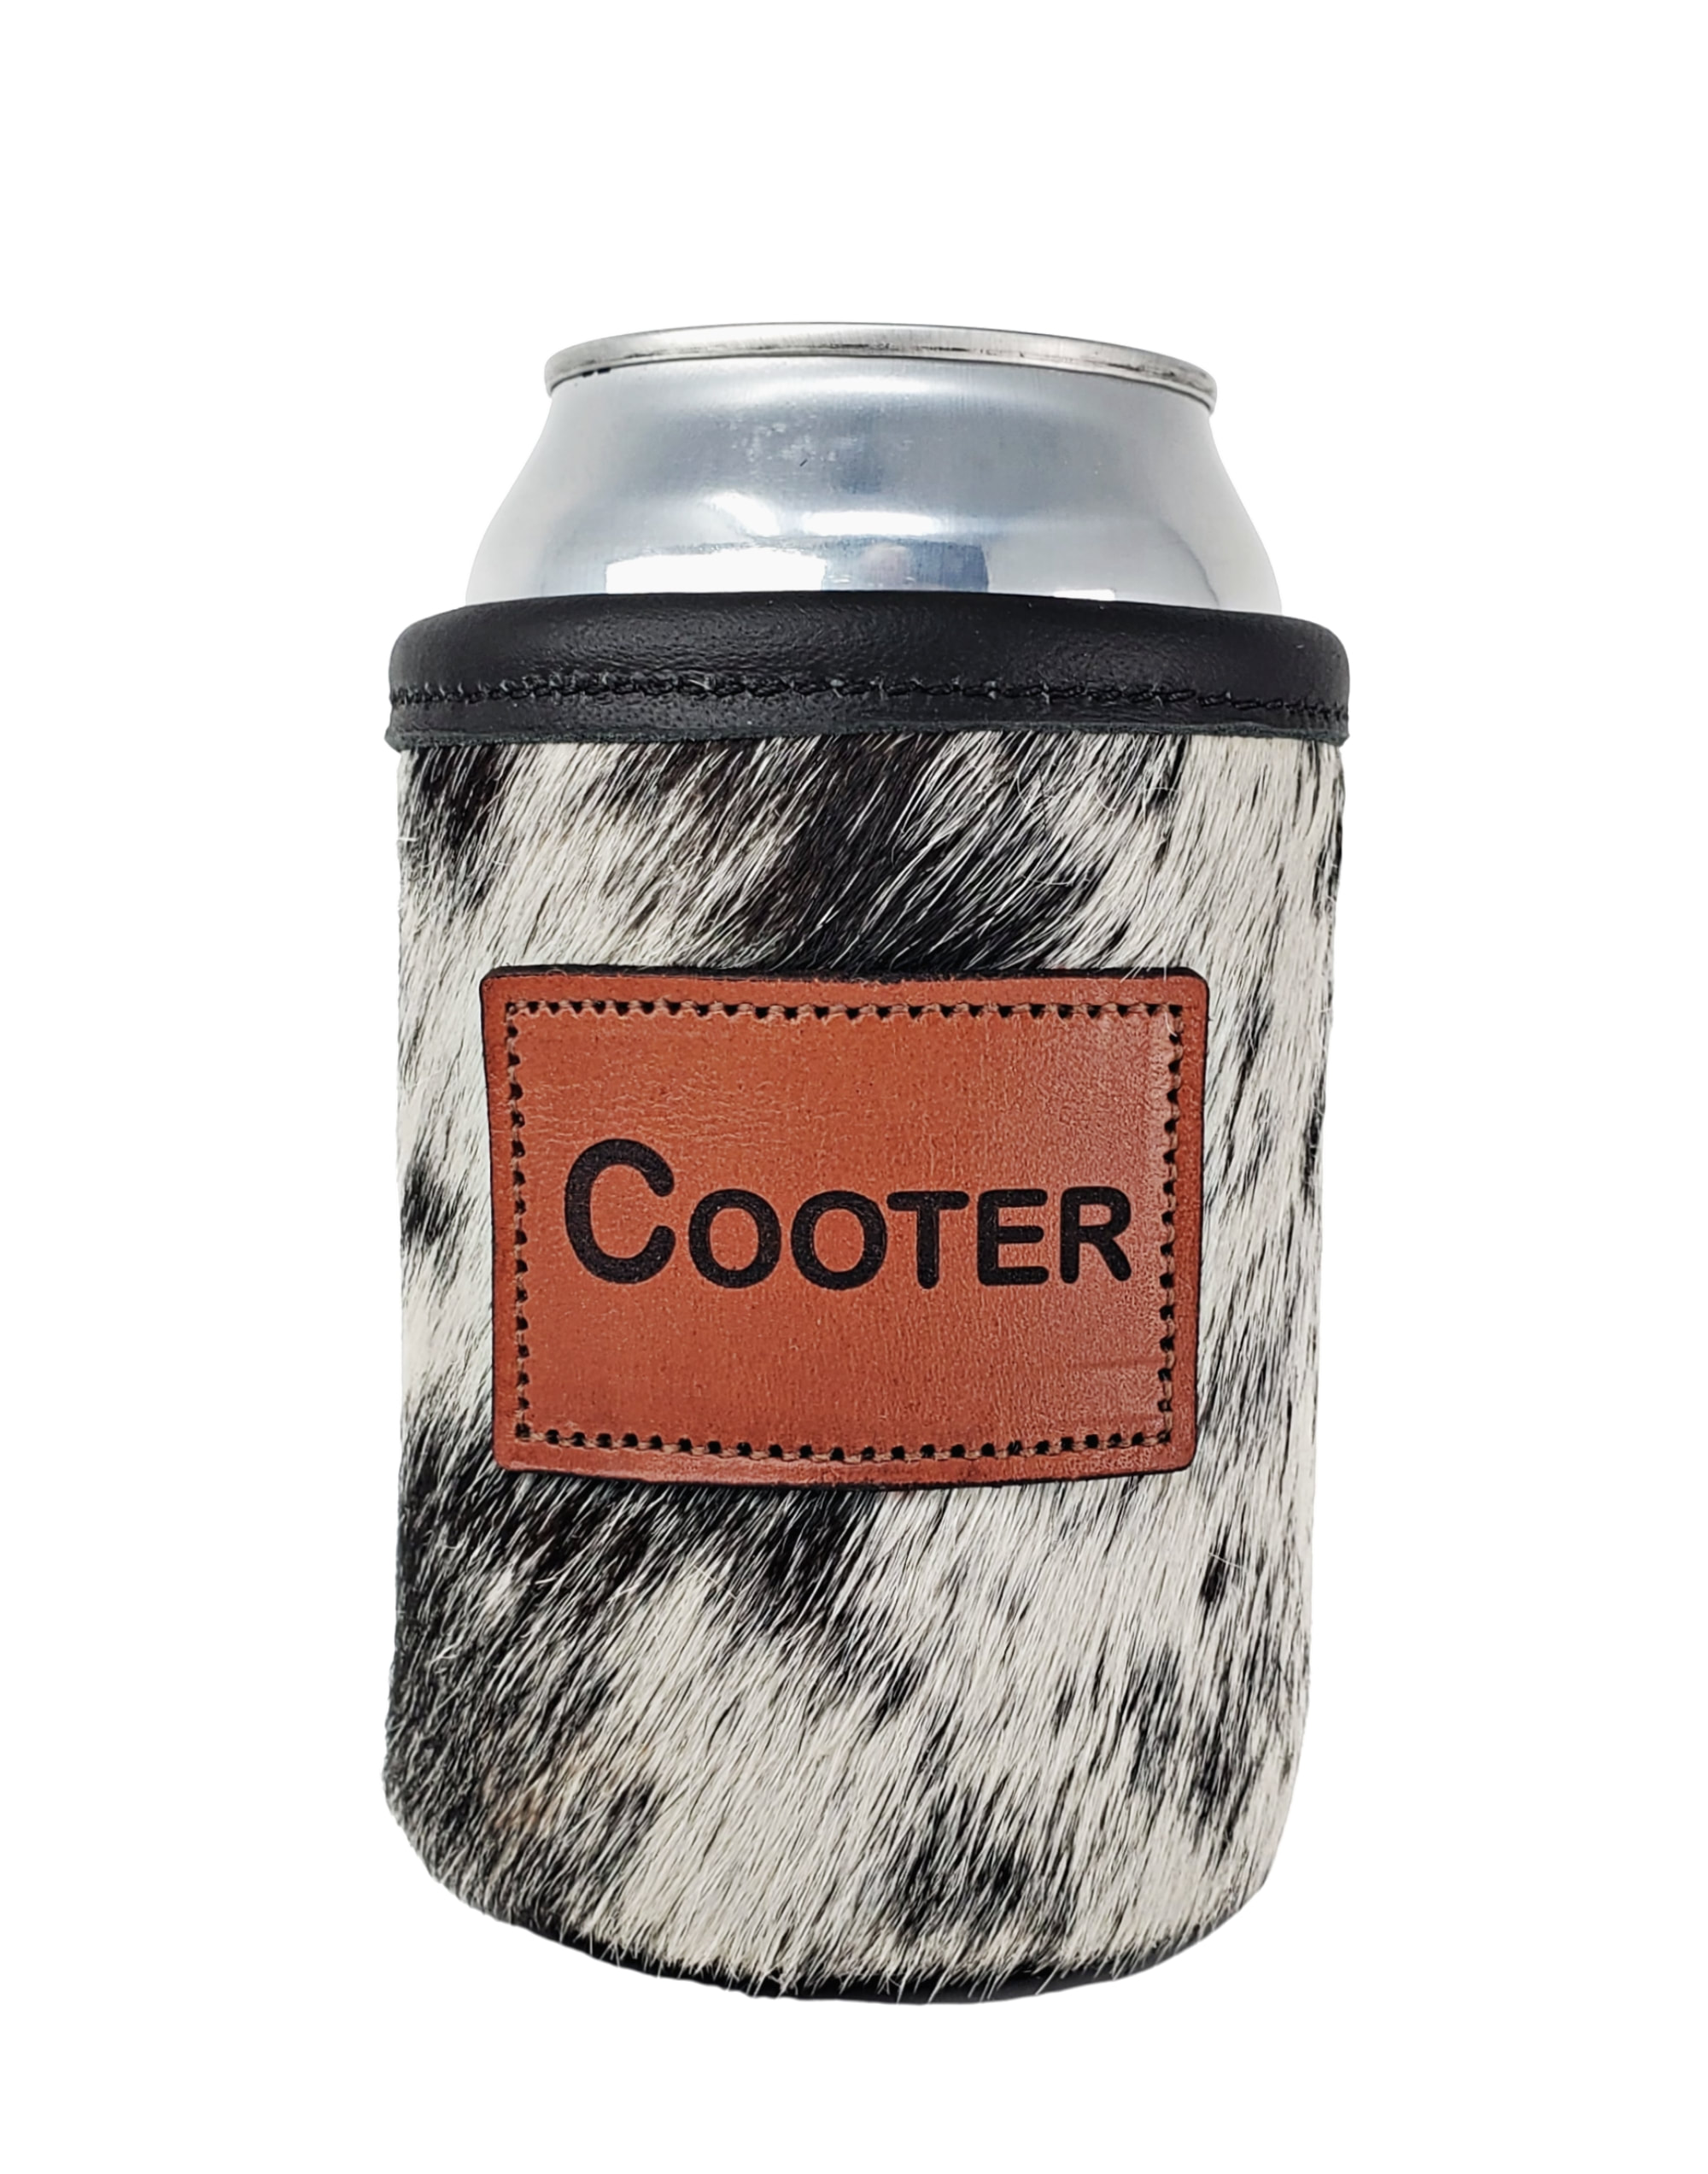 3 in 1 Insulated Koozie!  Insulated koozie, Coors light beer can